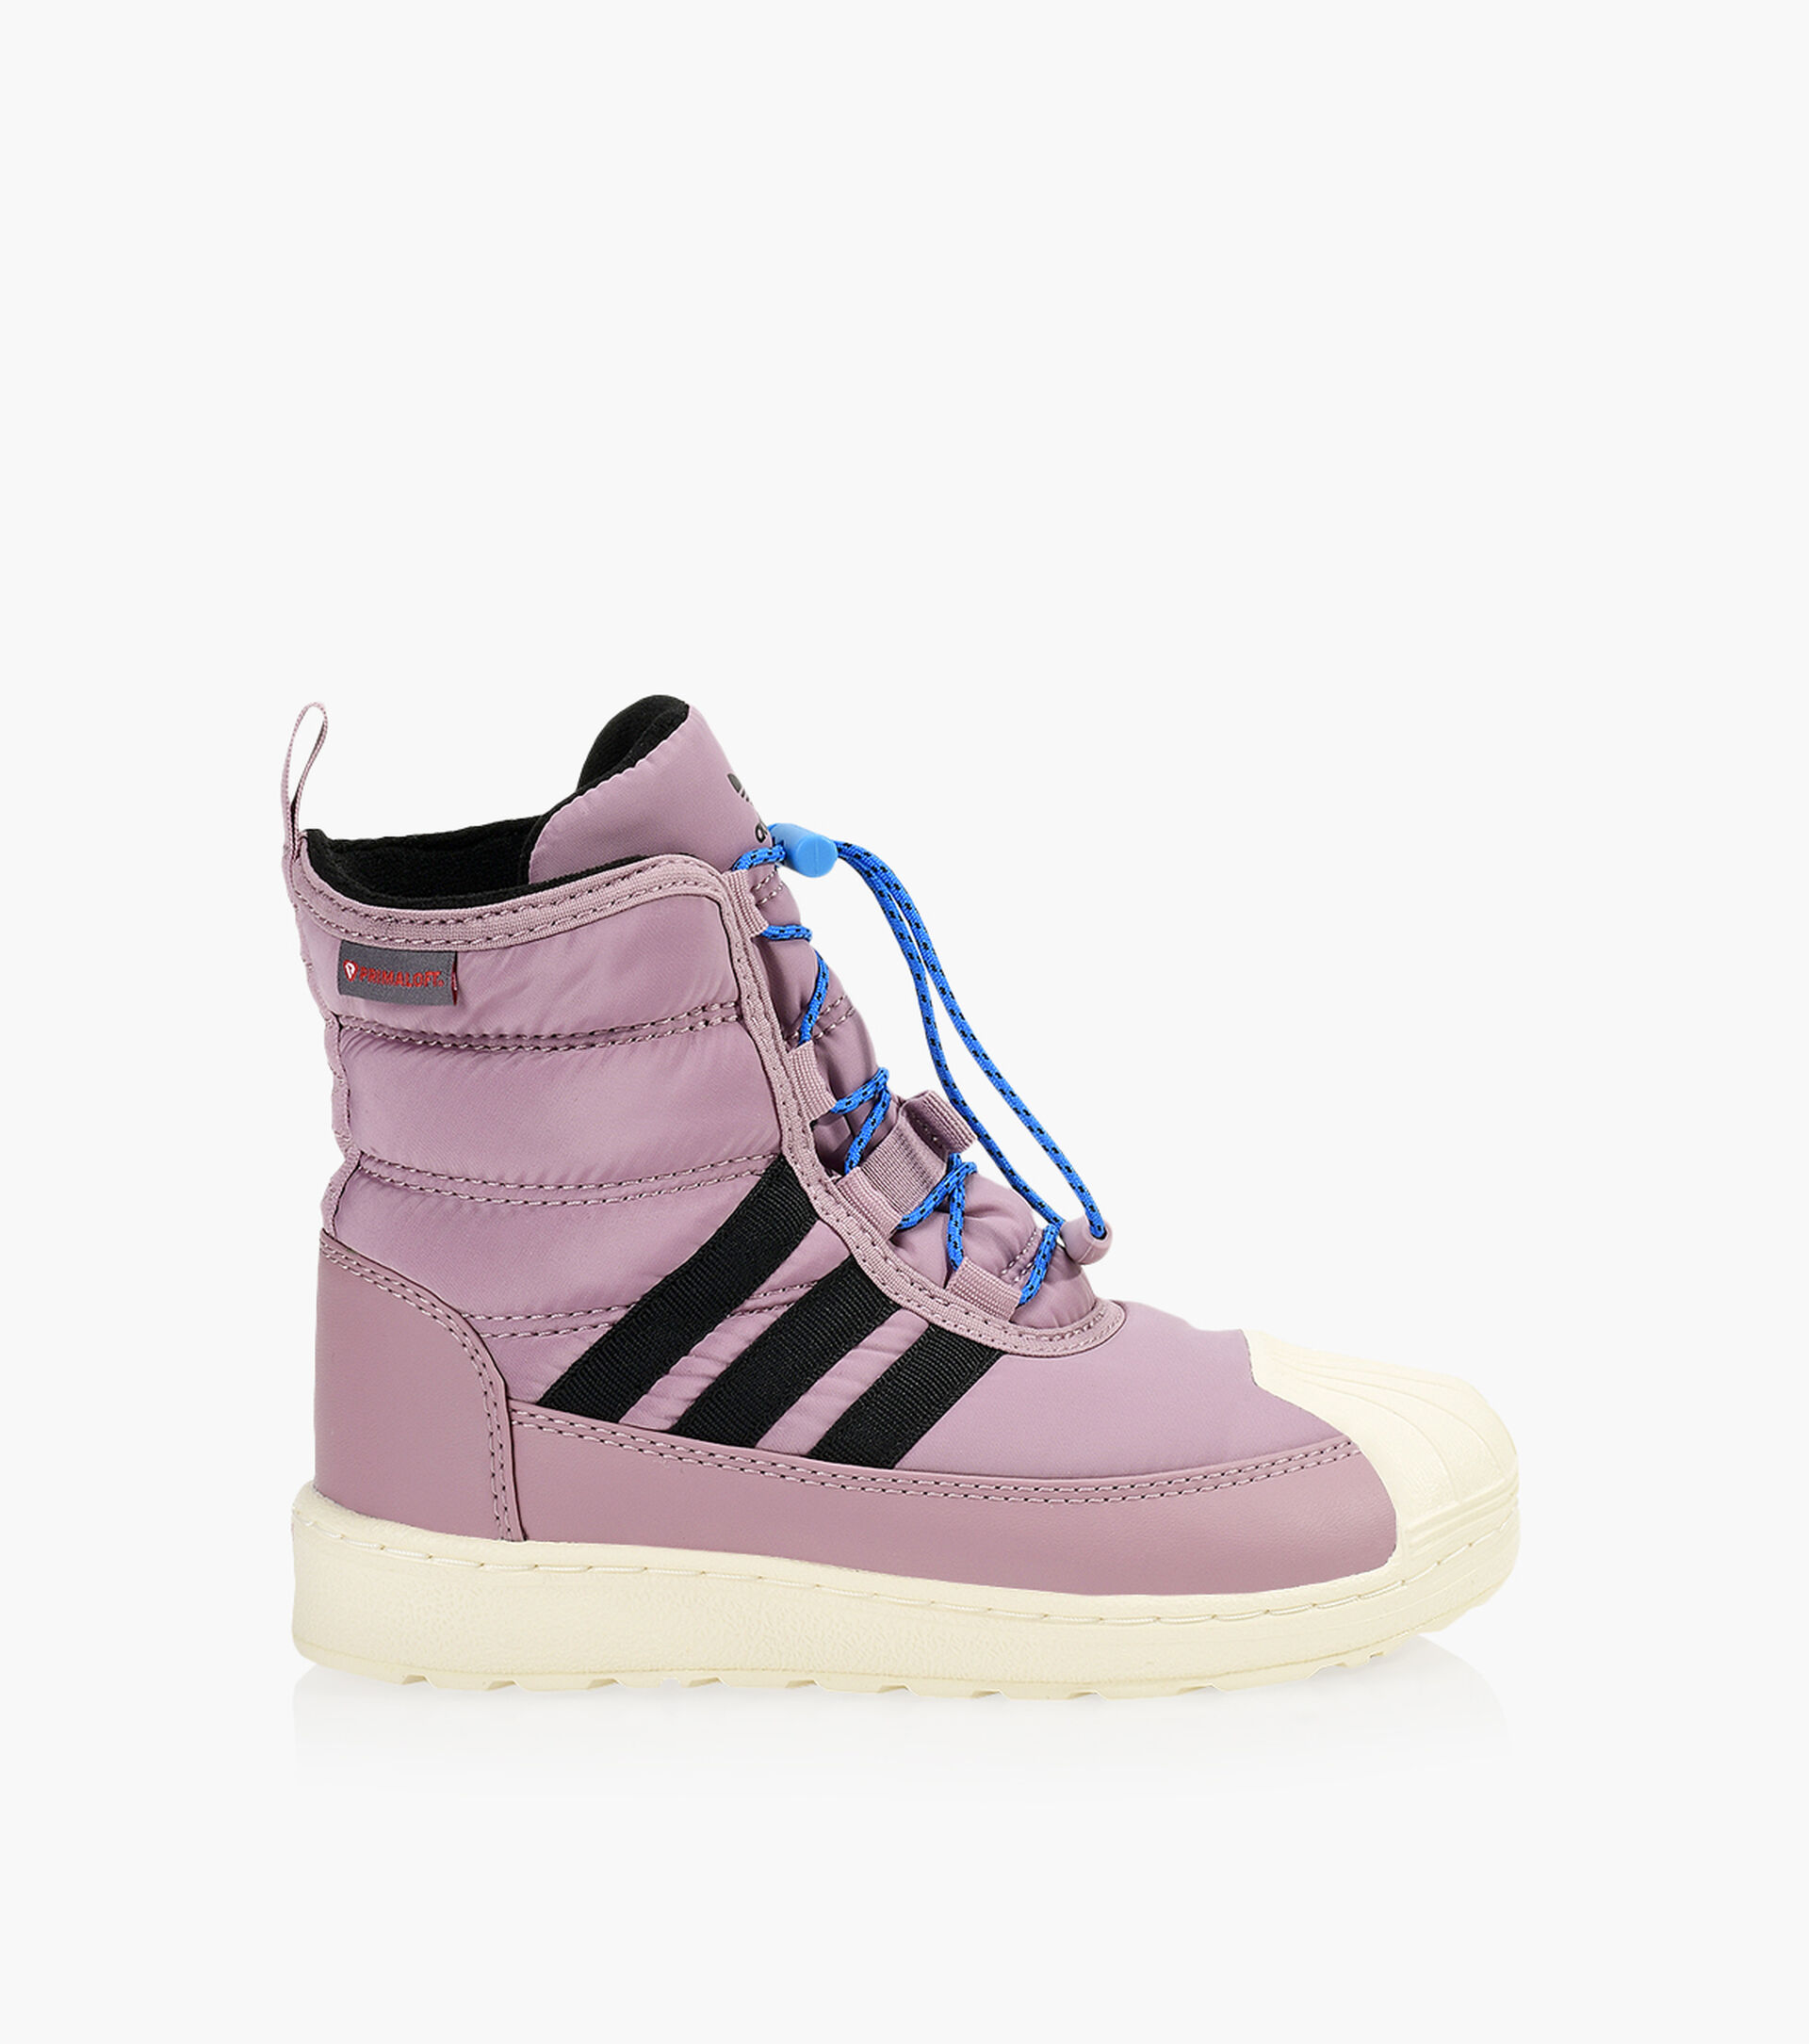 ADIDAS SUPERSTAR 360 BOOT 2.0 - Violet | Browns Shoes